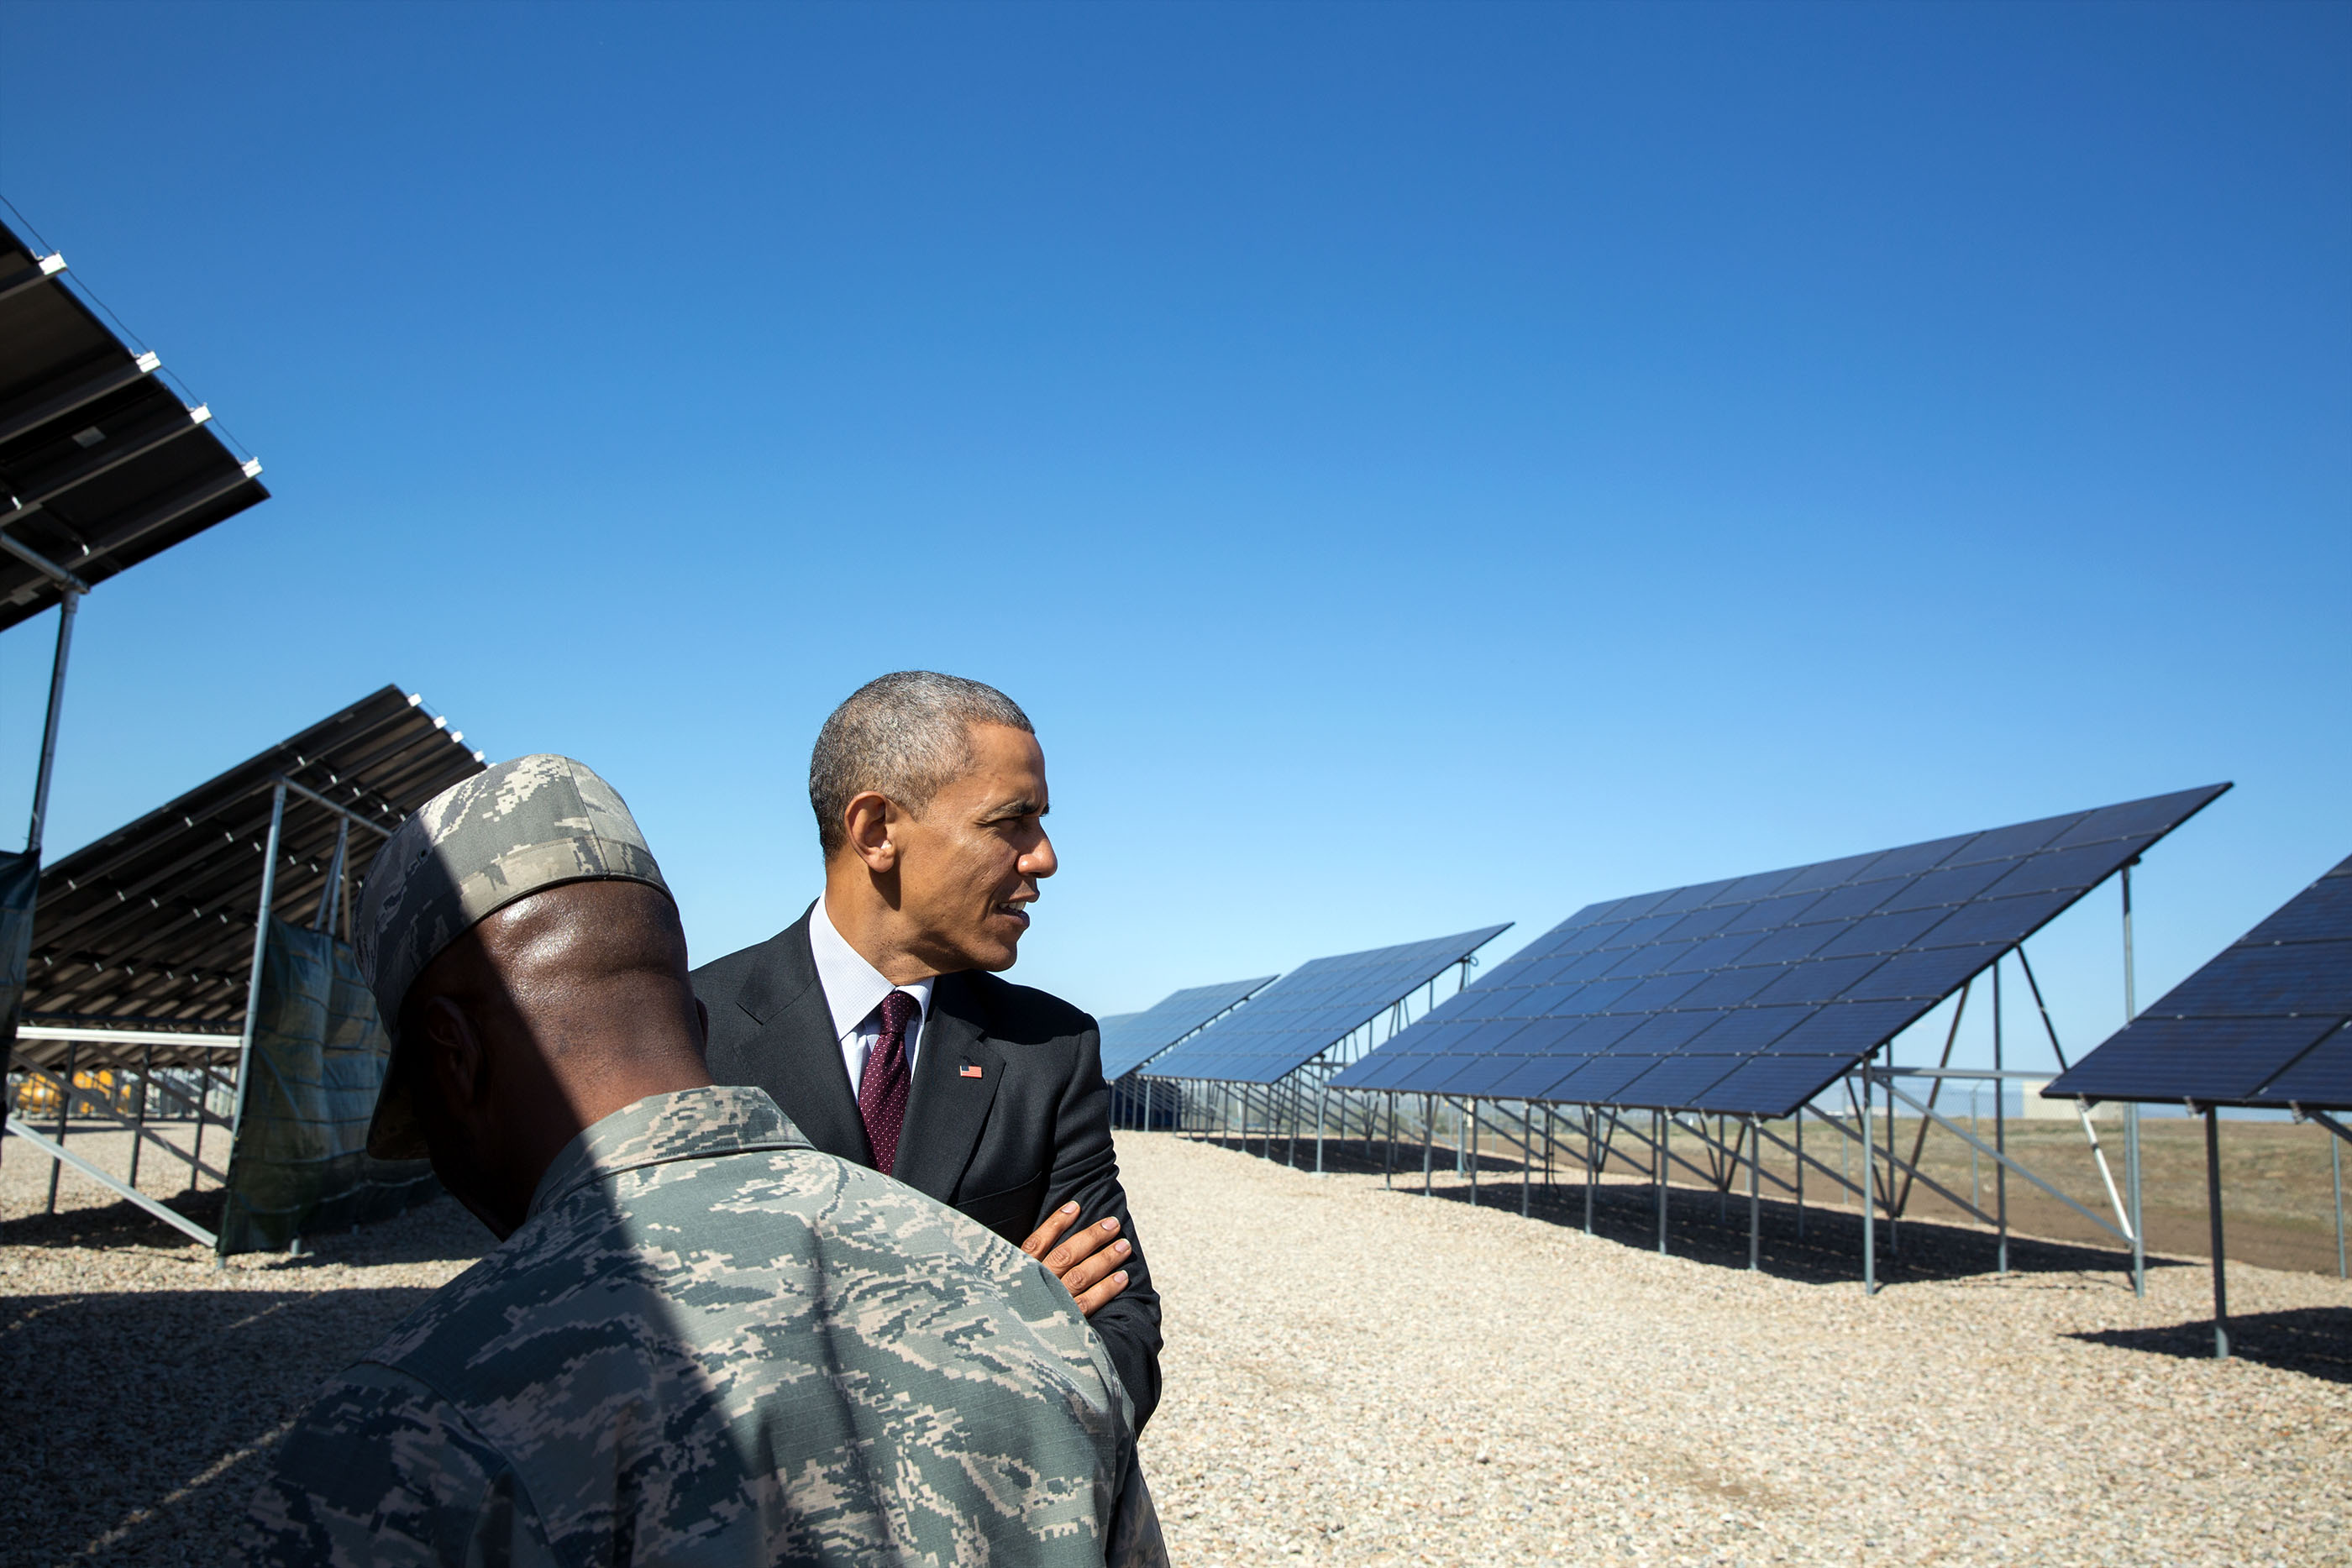 Utah, April 3, 2015. Viewing solar panels at Hill Air Force Base. (Official White House Photo by Pete Souza)